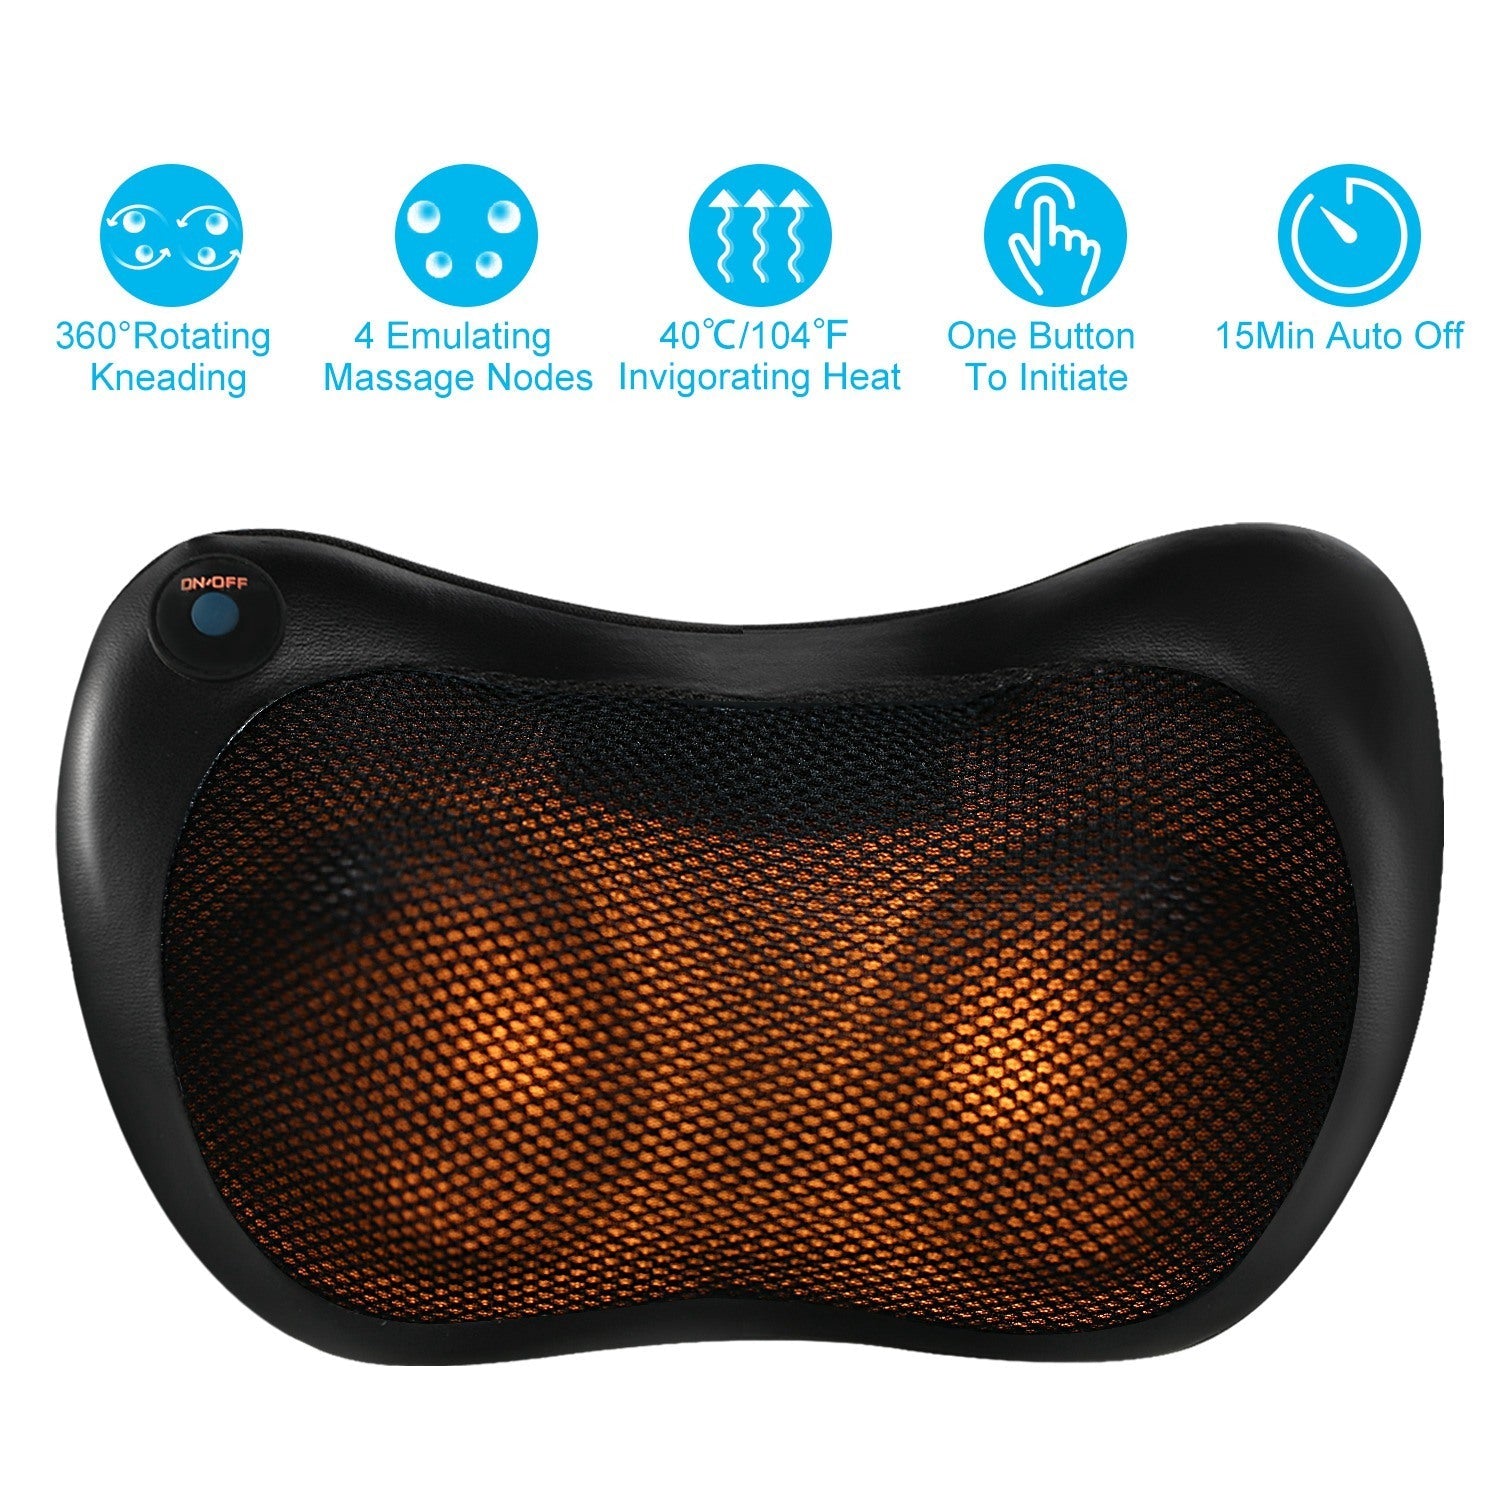 iMountek Neck & Back Therapeutic Massage Pillow: Kneading Relief for On-the-Go and Home Use